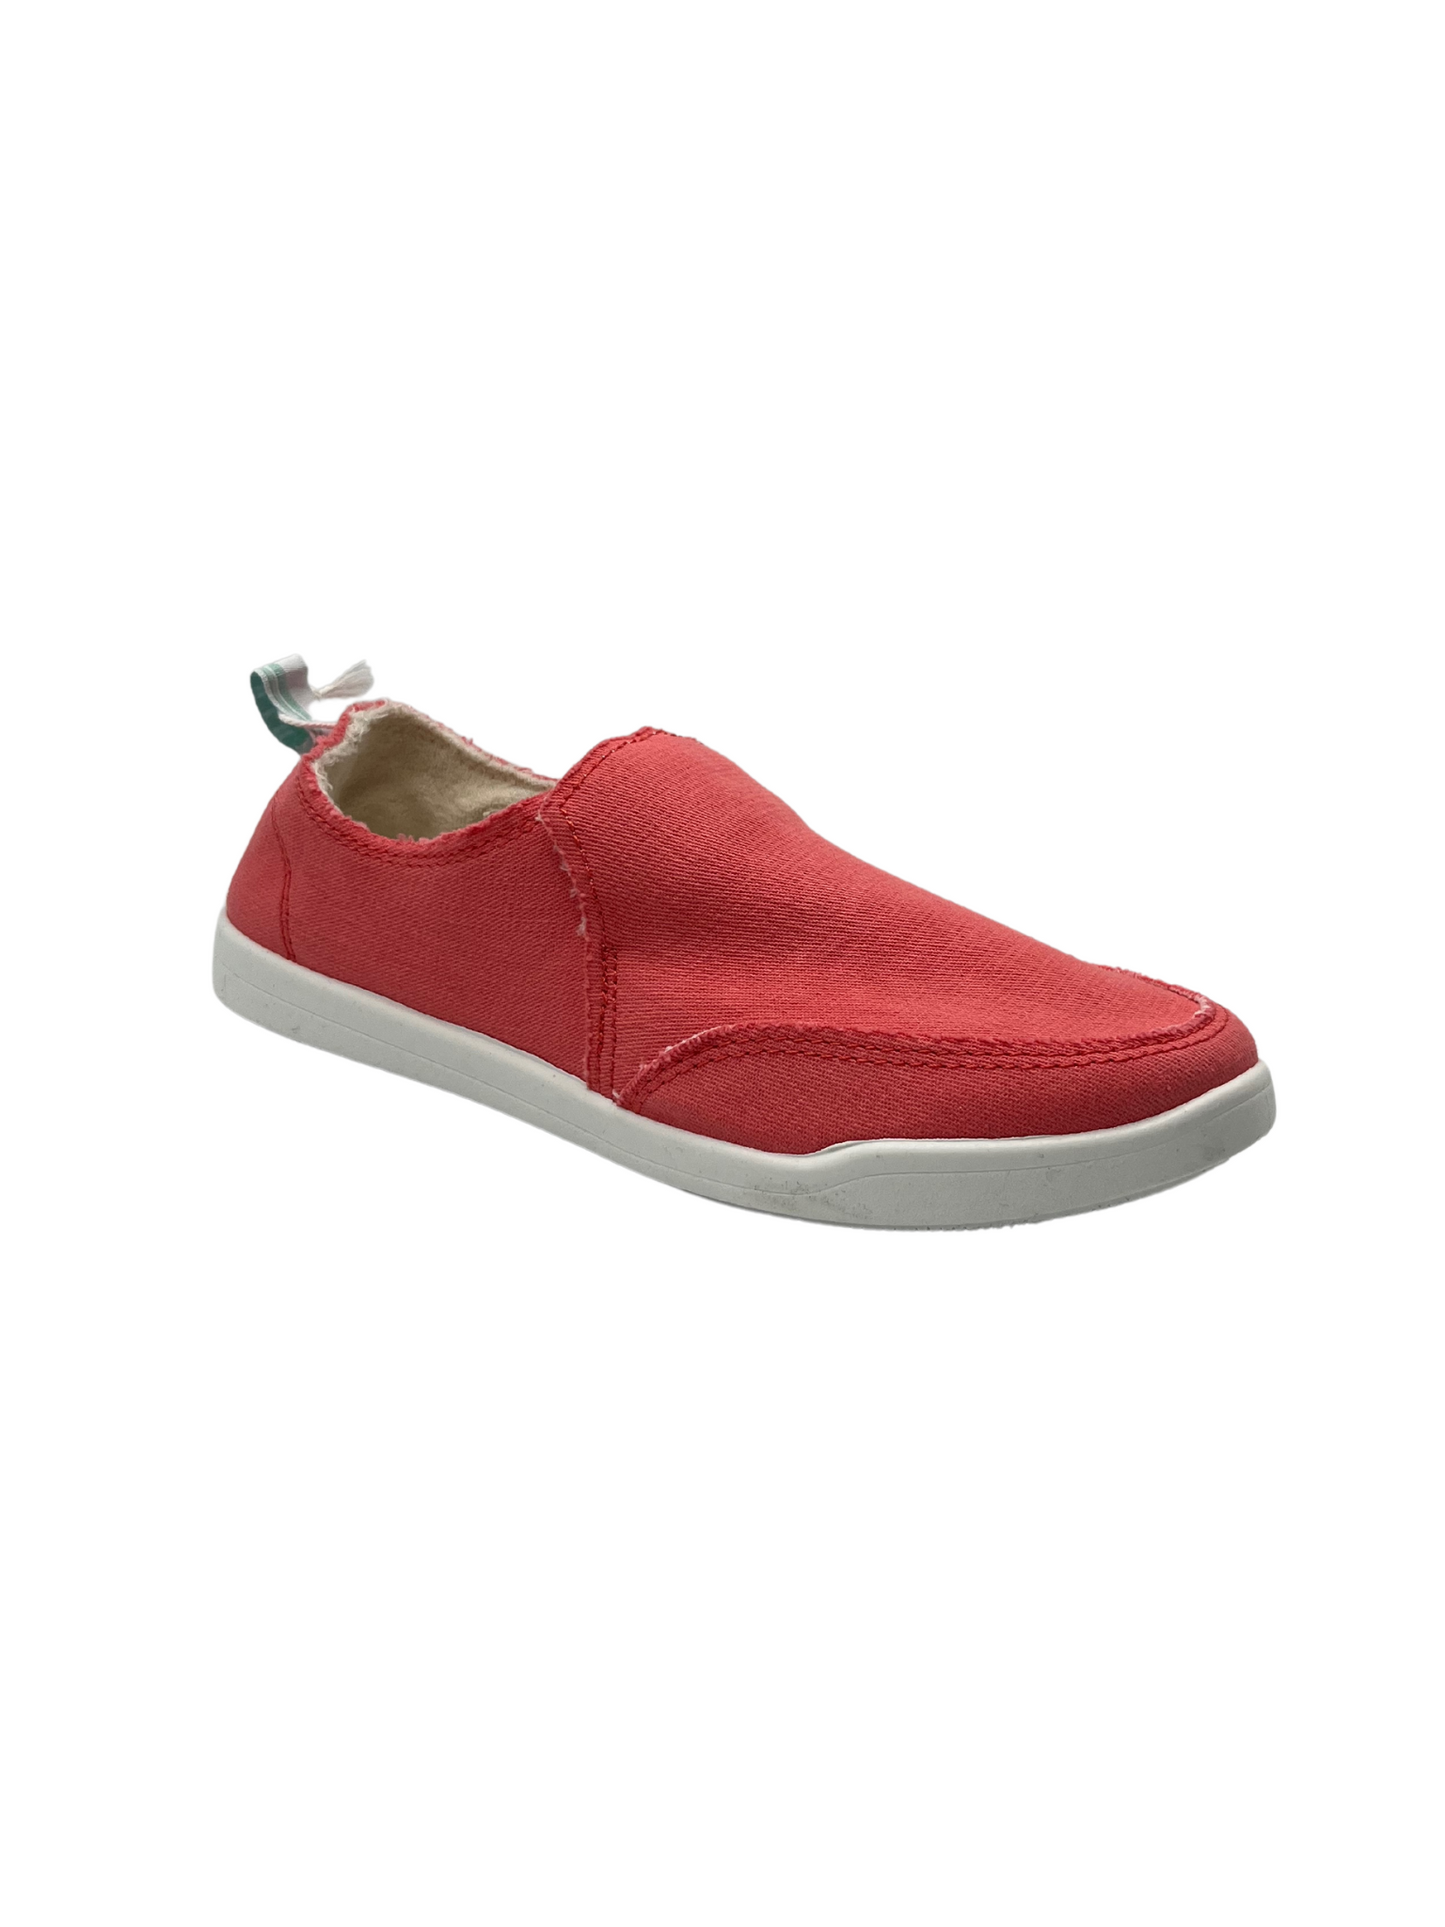 Right profile image of a bright coral coloured sneaker on a white rubber bottom.